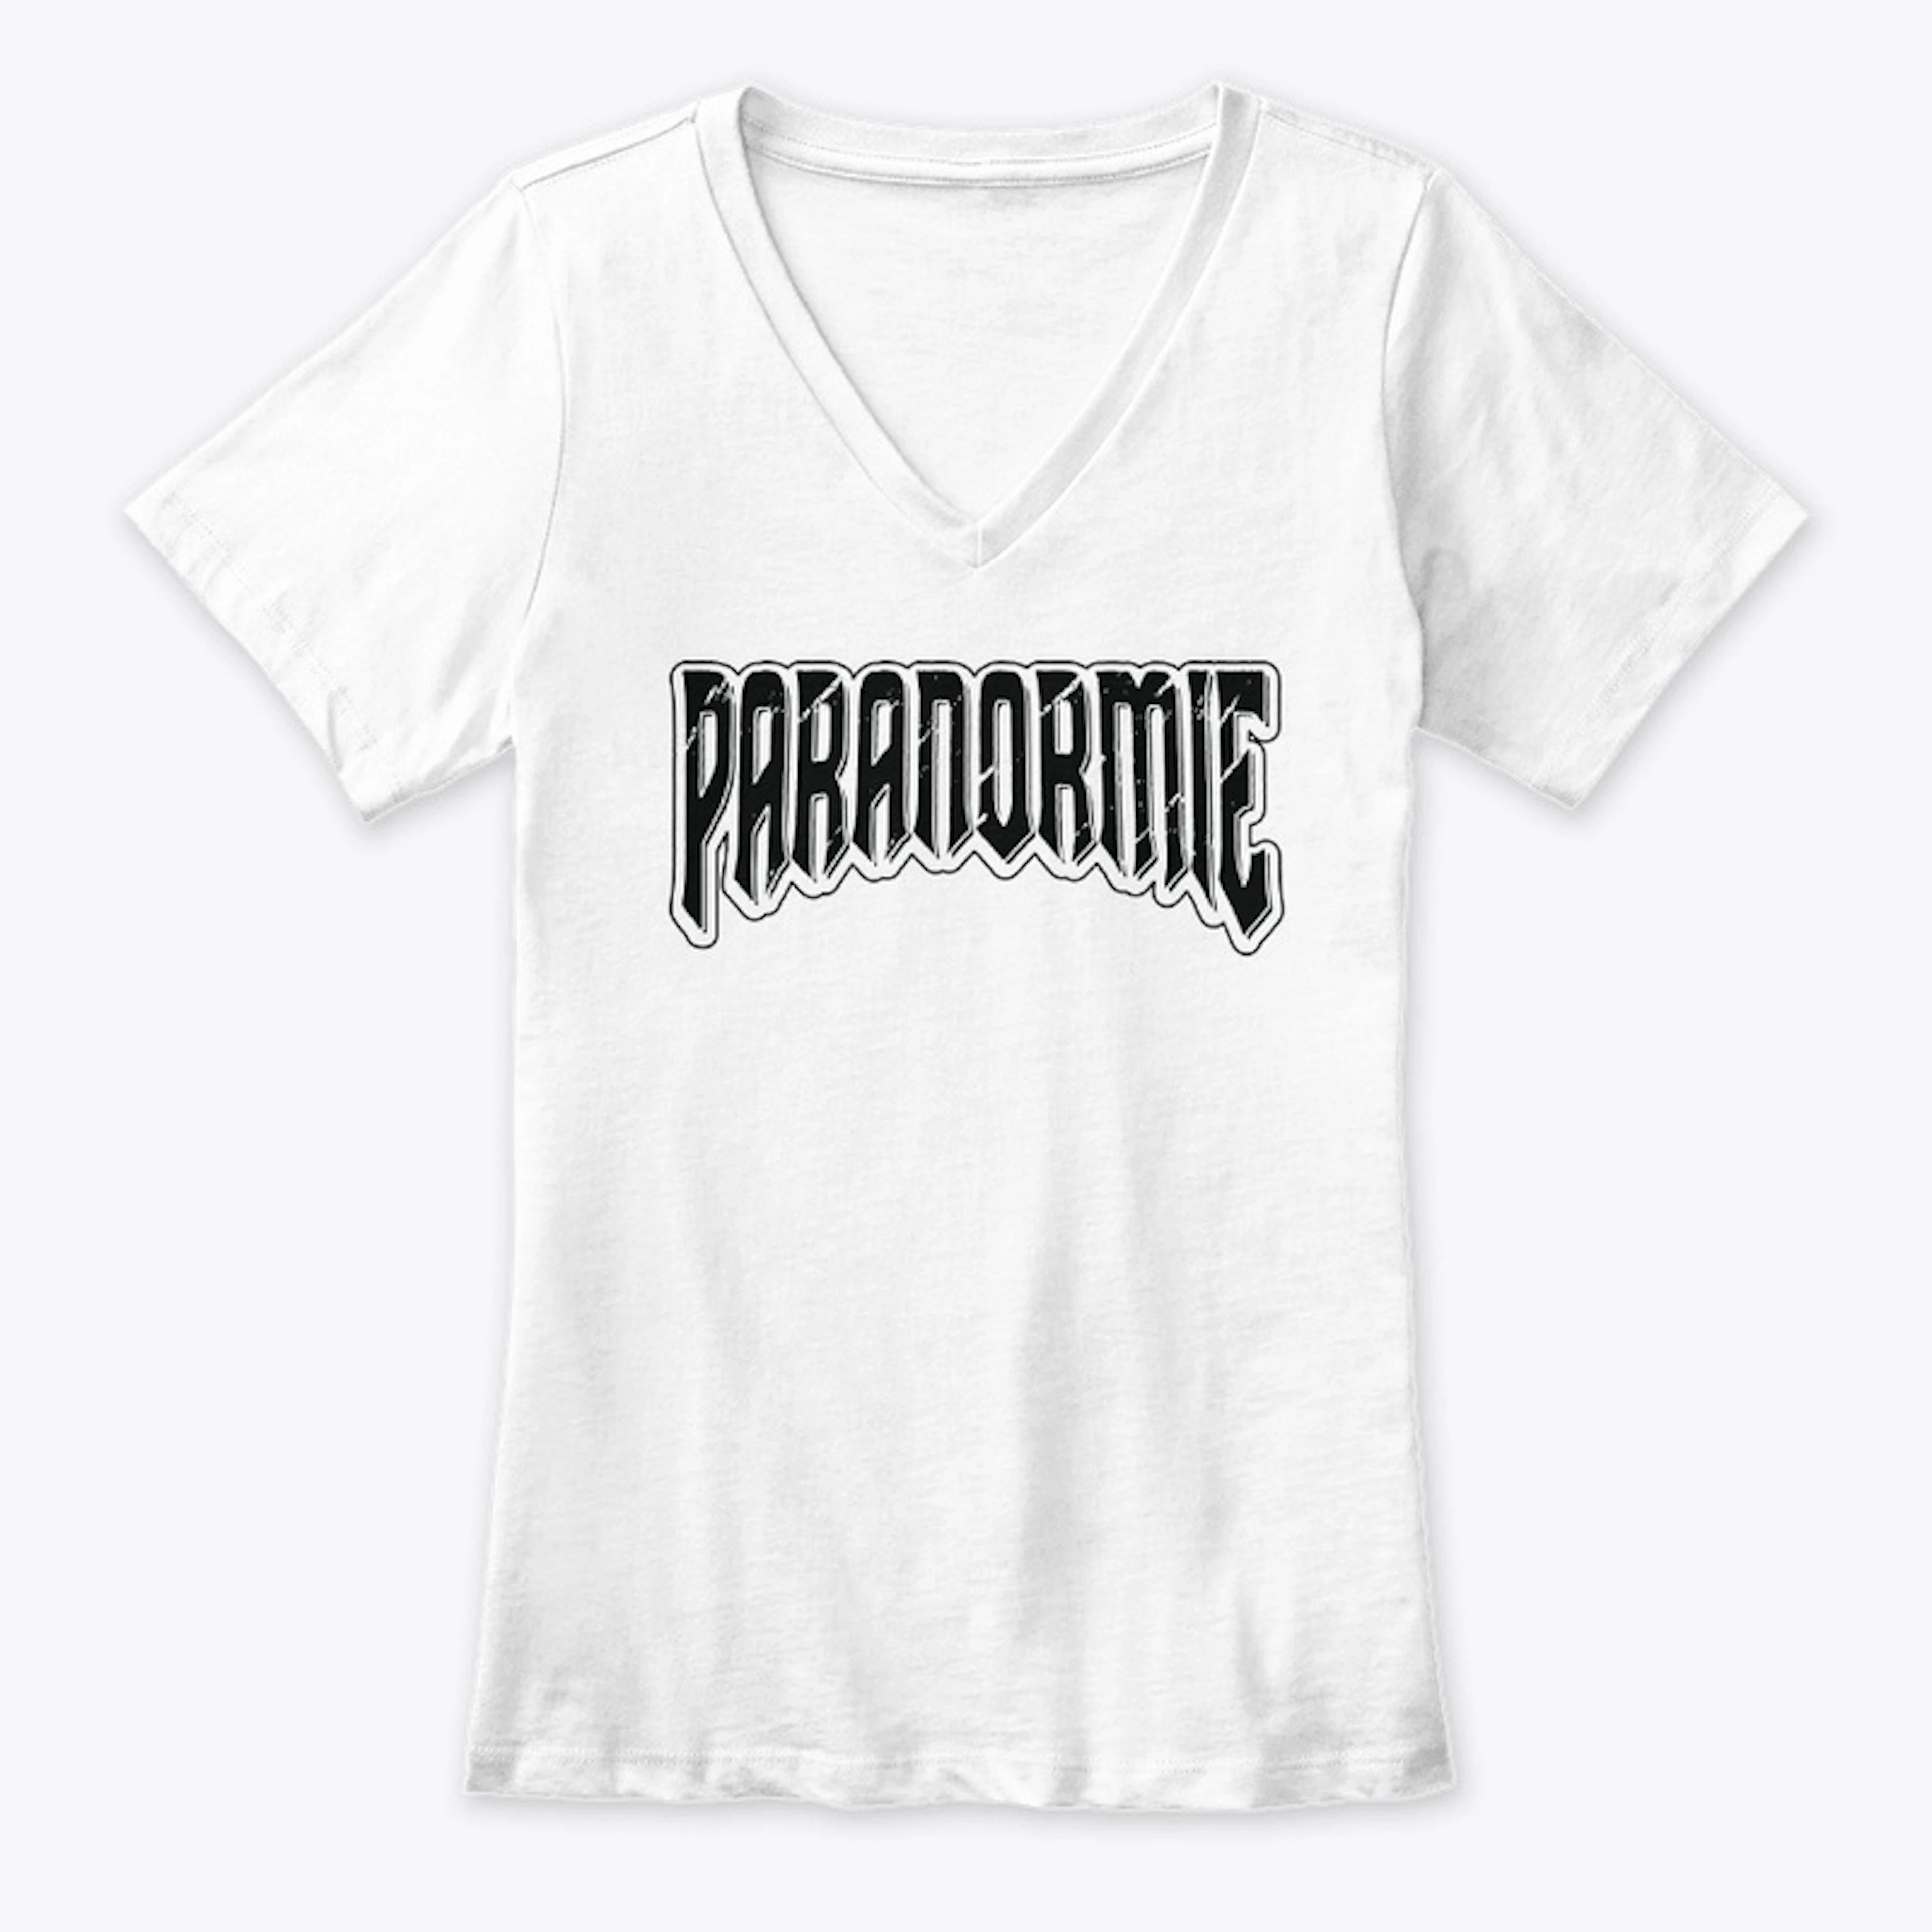 Paranormie